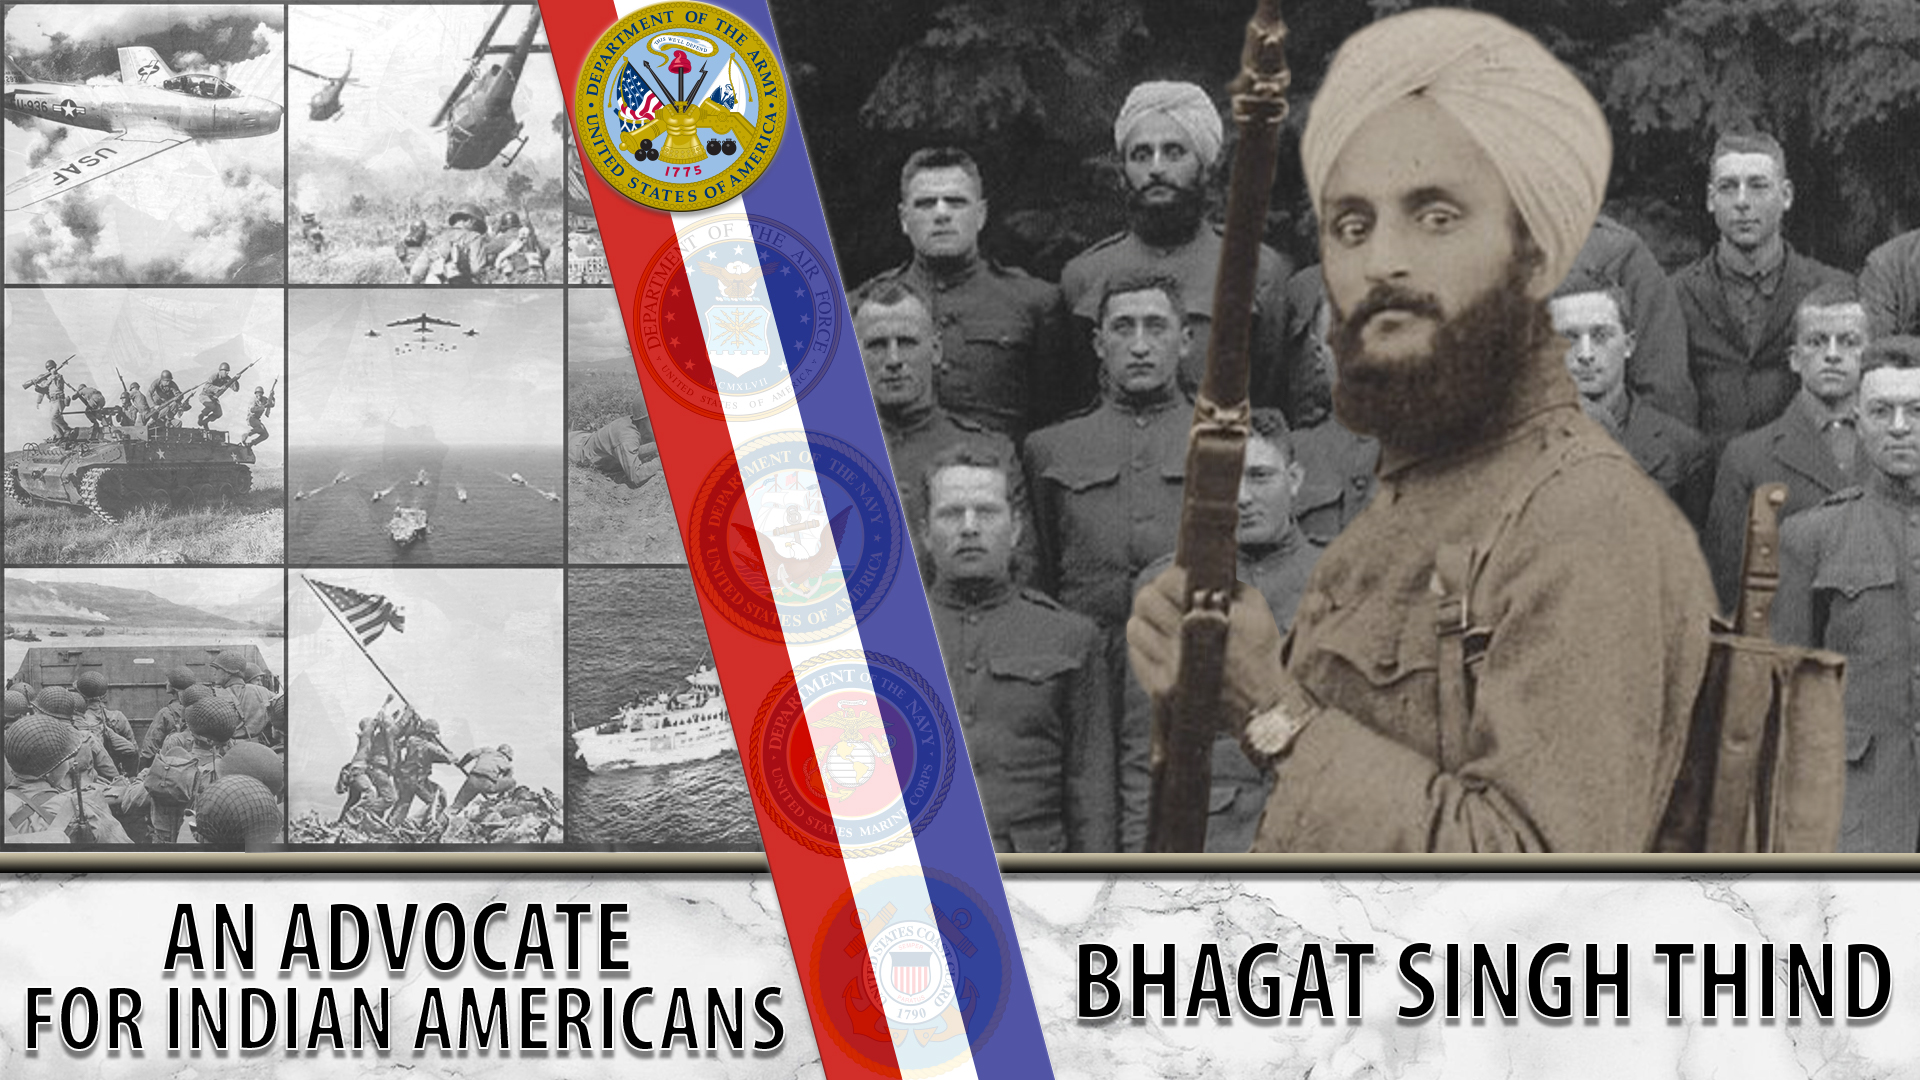 Bhagat Singh Thind: An advocate for Indian Americans - VA News